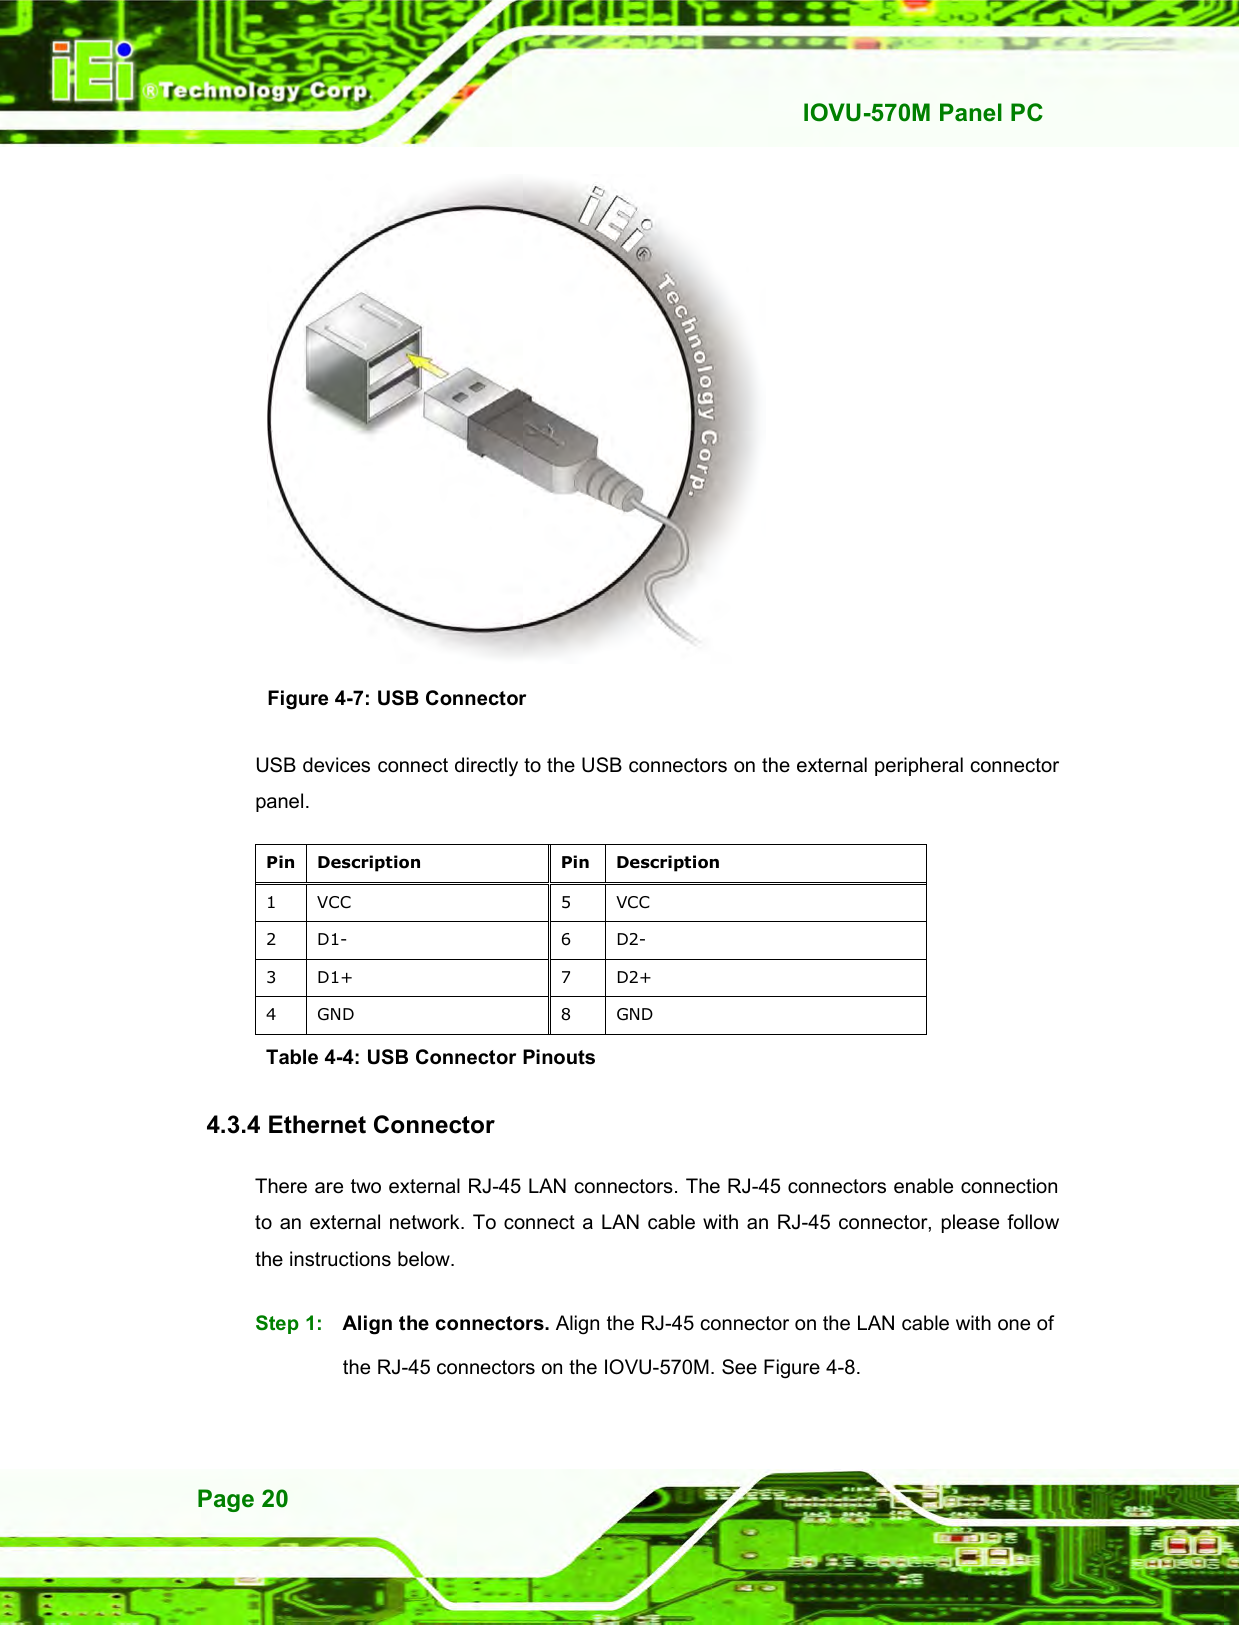   IOVU-570M Panel PC Page 20  Figure 4-7: USB Connector USB devices connect directly to the USB connectors on the external peripheral connector panel. Pin Description  Pin Description 1  VCC  5  VCC 2  D1-  6  D2- 3  D1+  7  D2+ 4  GND  8  GND Table 4-4: USB Connector Pinouts 4.3.4 Ethernet Connector There are two external RJ-45 LAN connectors. The RJ-45 connectors enable connection to an external network. To connect a LAN cable with an RJ-45 connector, please follow the instructions below. Step 1:  Align the connectors. Align the RJ-45 connector on the LAN cable with one of the RJ-45 connectors on the IOVU-570M. See Figure 4-8. 